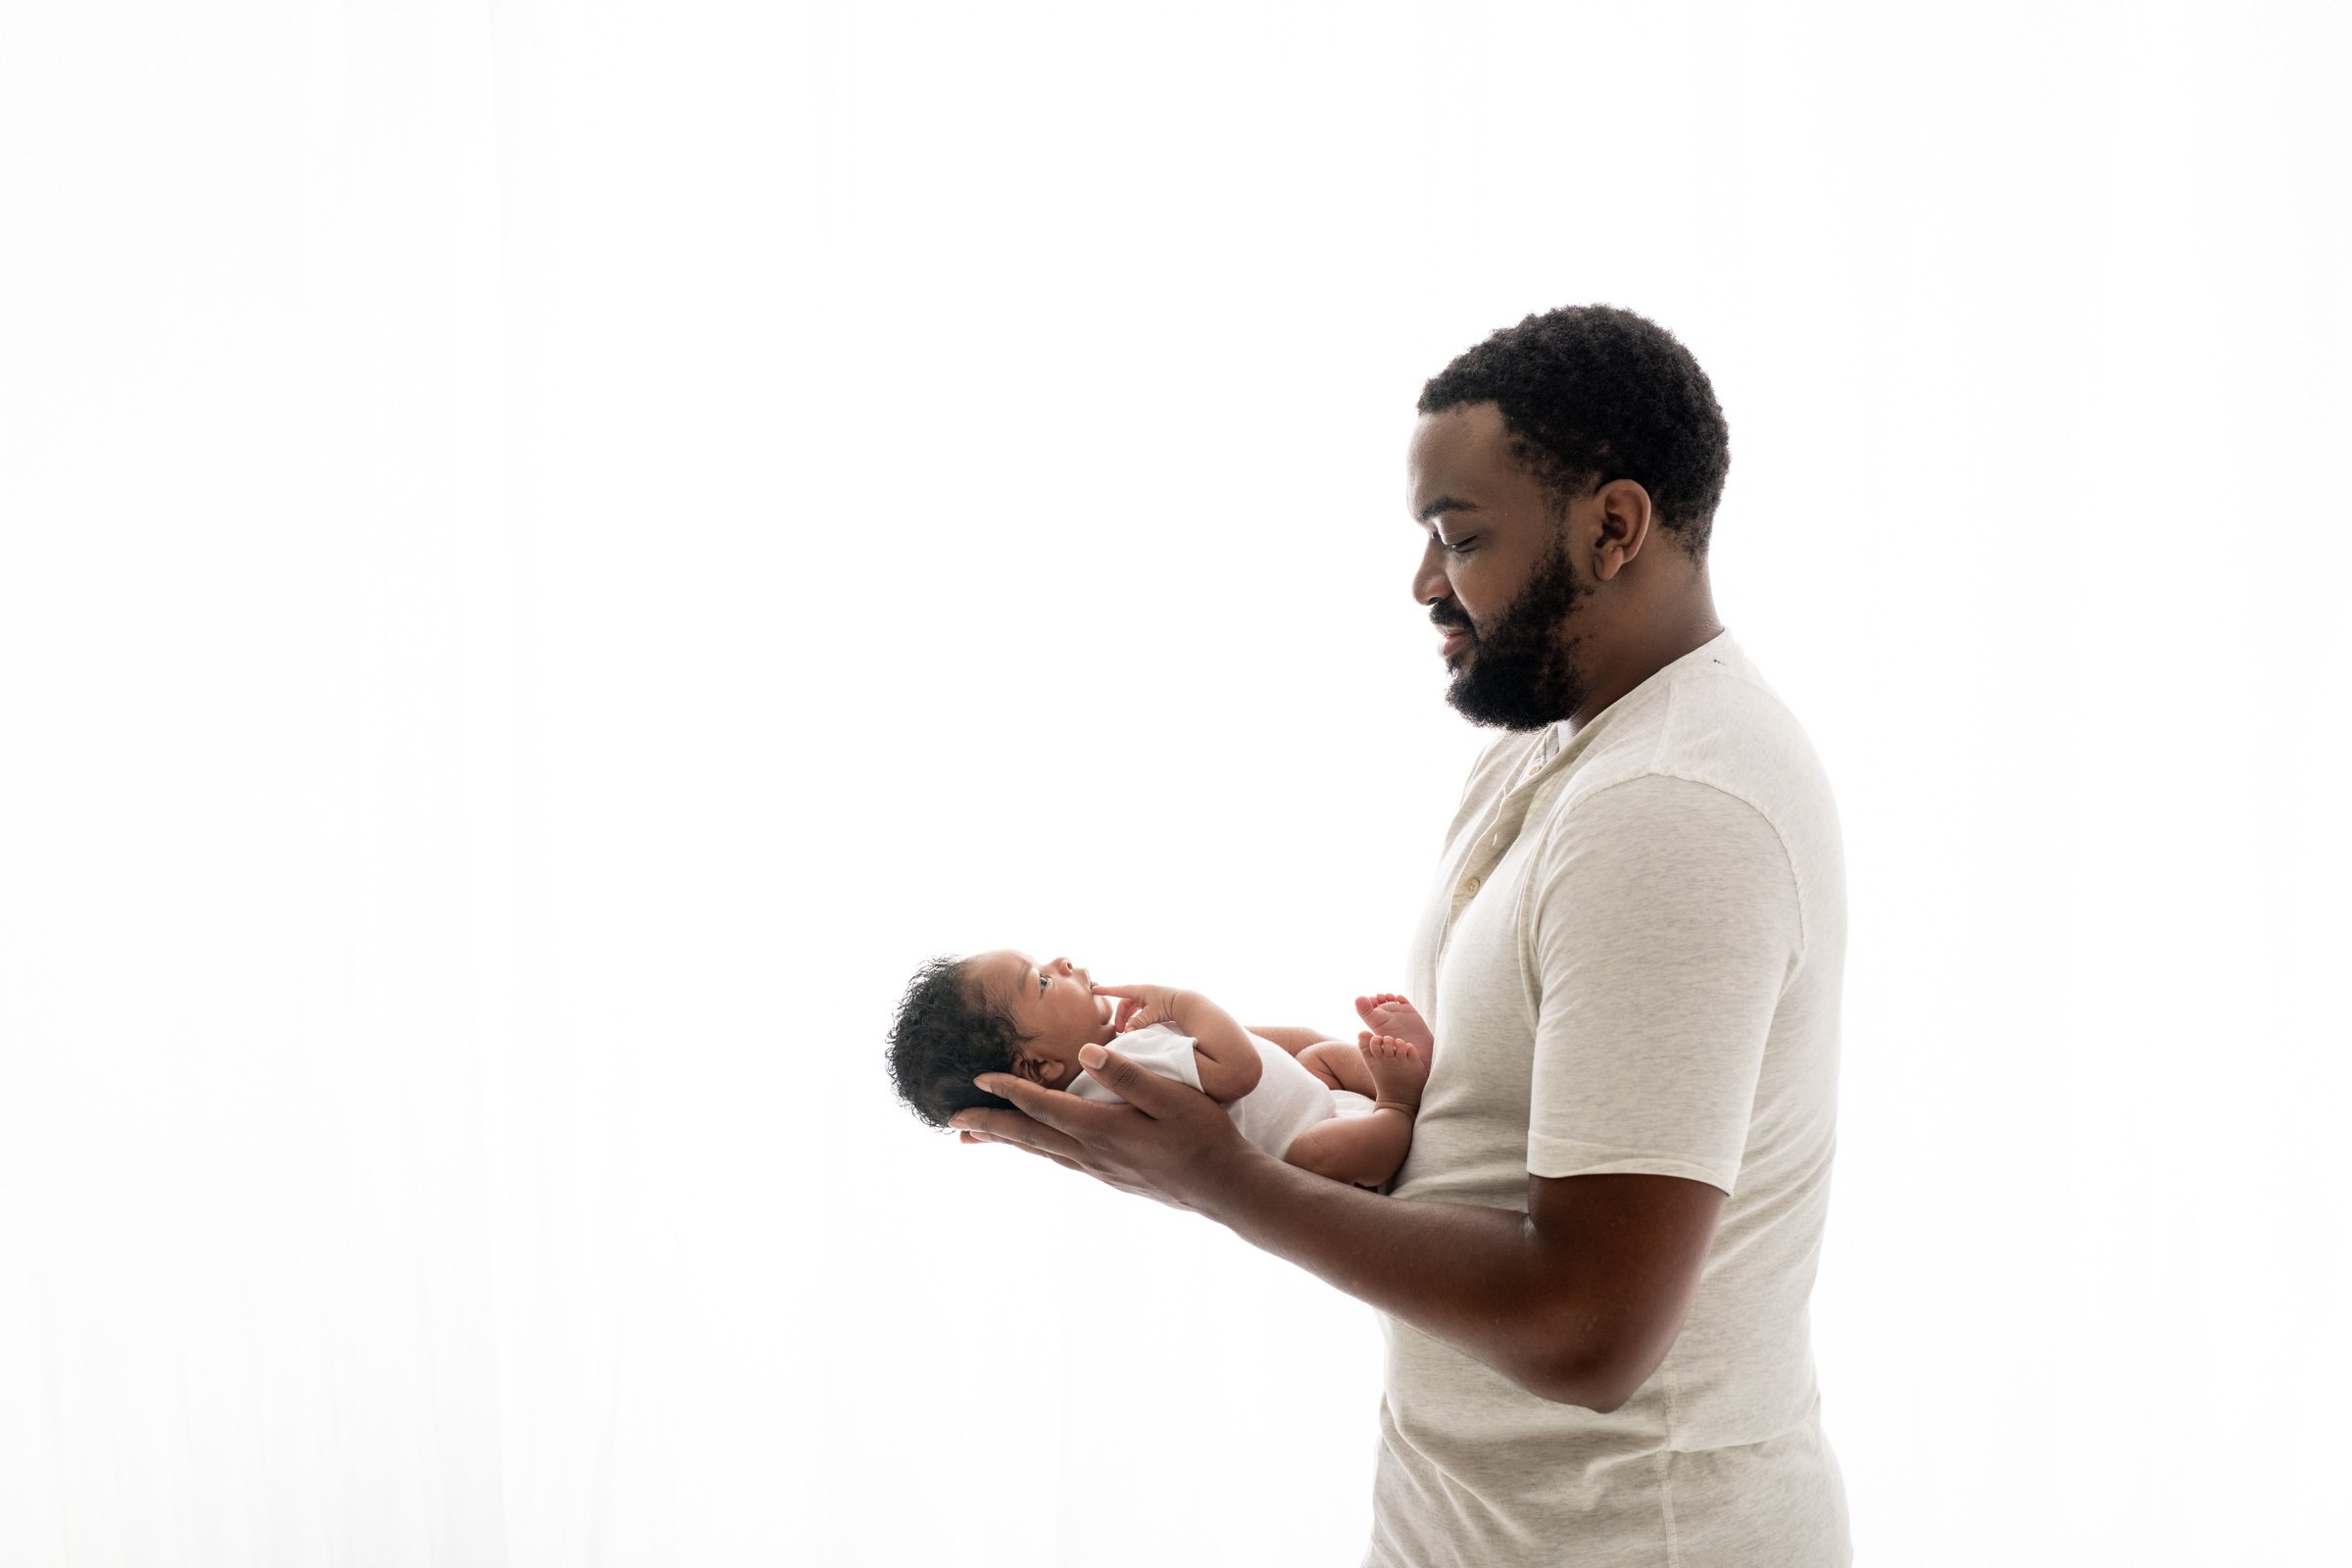  In front of a bright white window, a father holds his son in his arms by Nicole Hawkins Photography in New Jersey. father at newborn jr and dad #nicolehawkinsphotography #NJbabyphotography #newbornportraits #NewJerseyStudioPhotography #newbornsessio